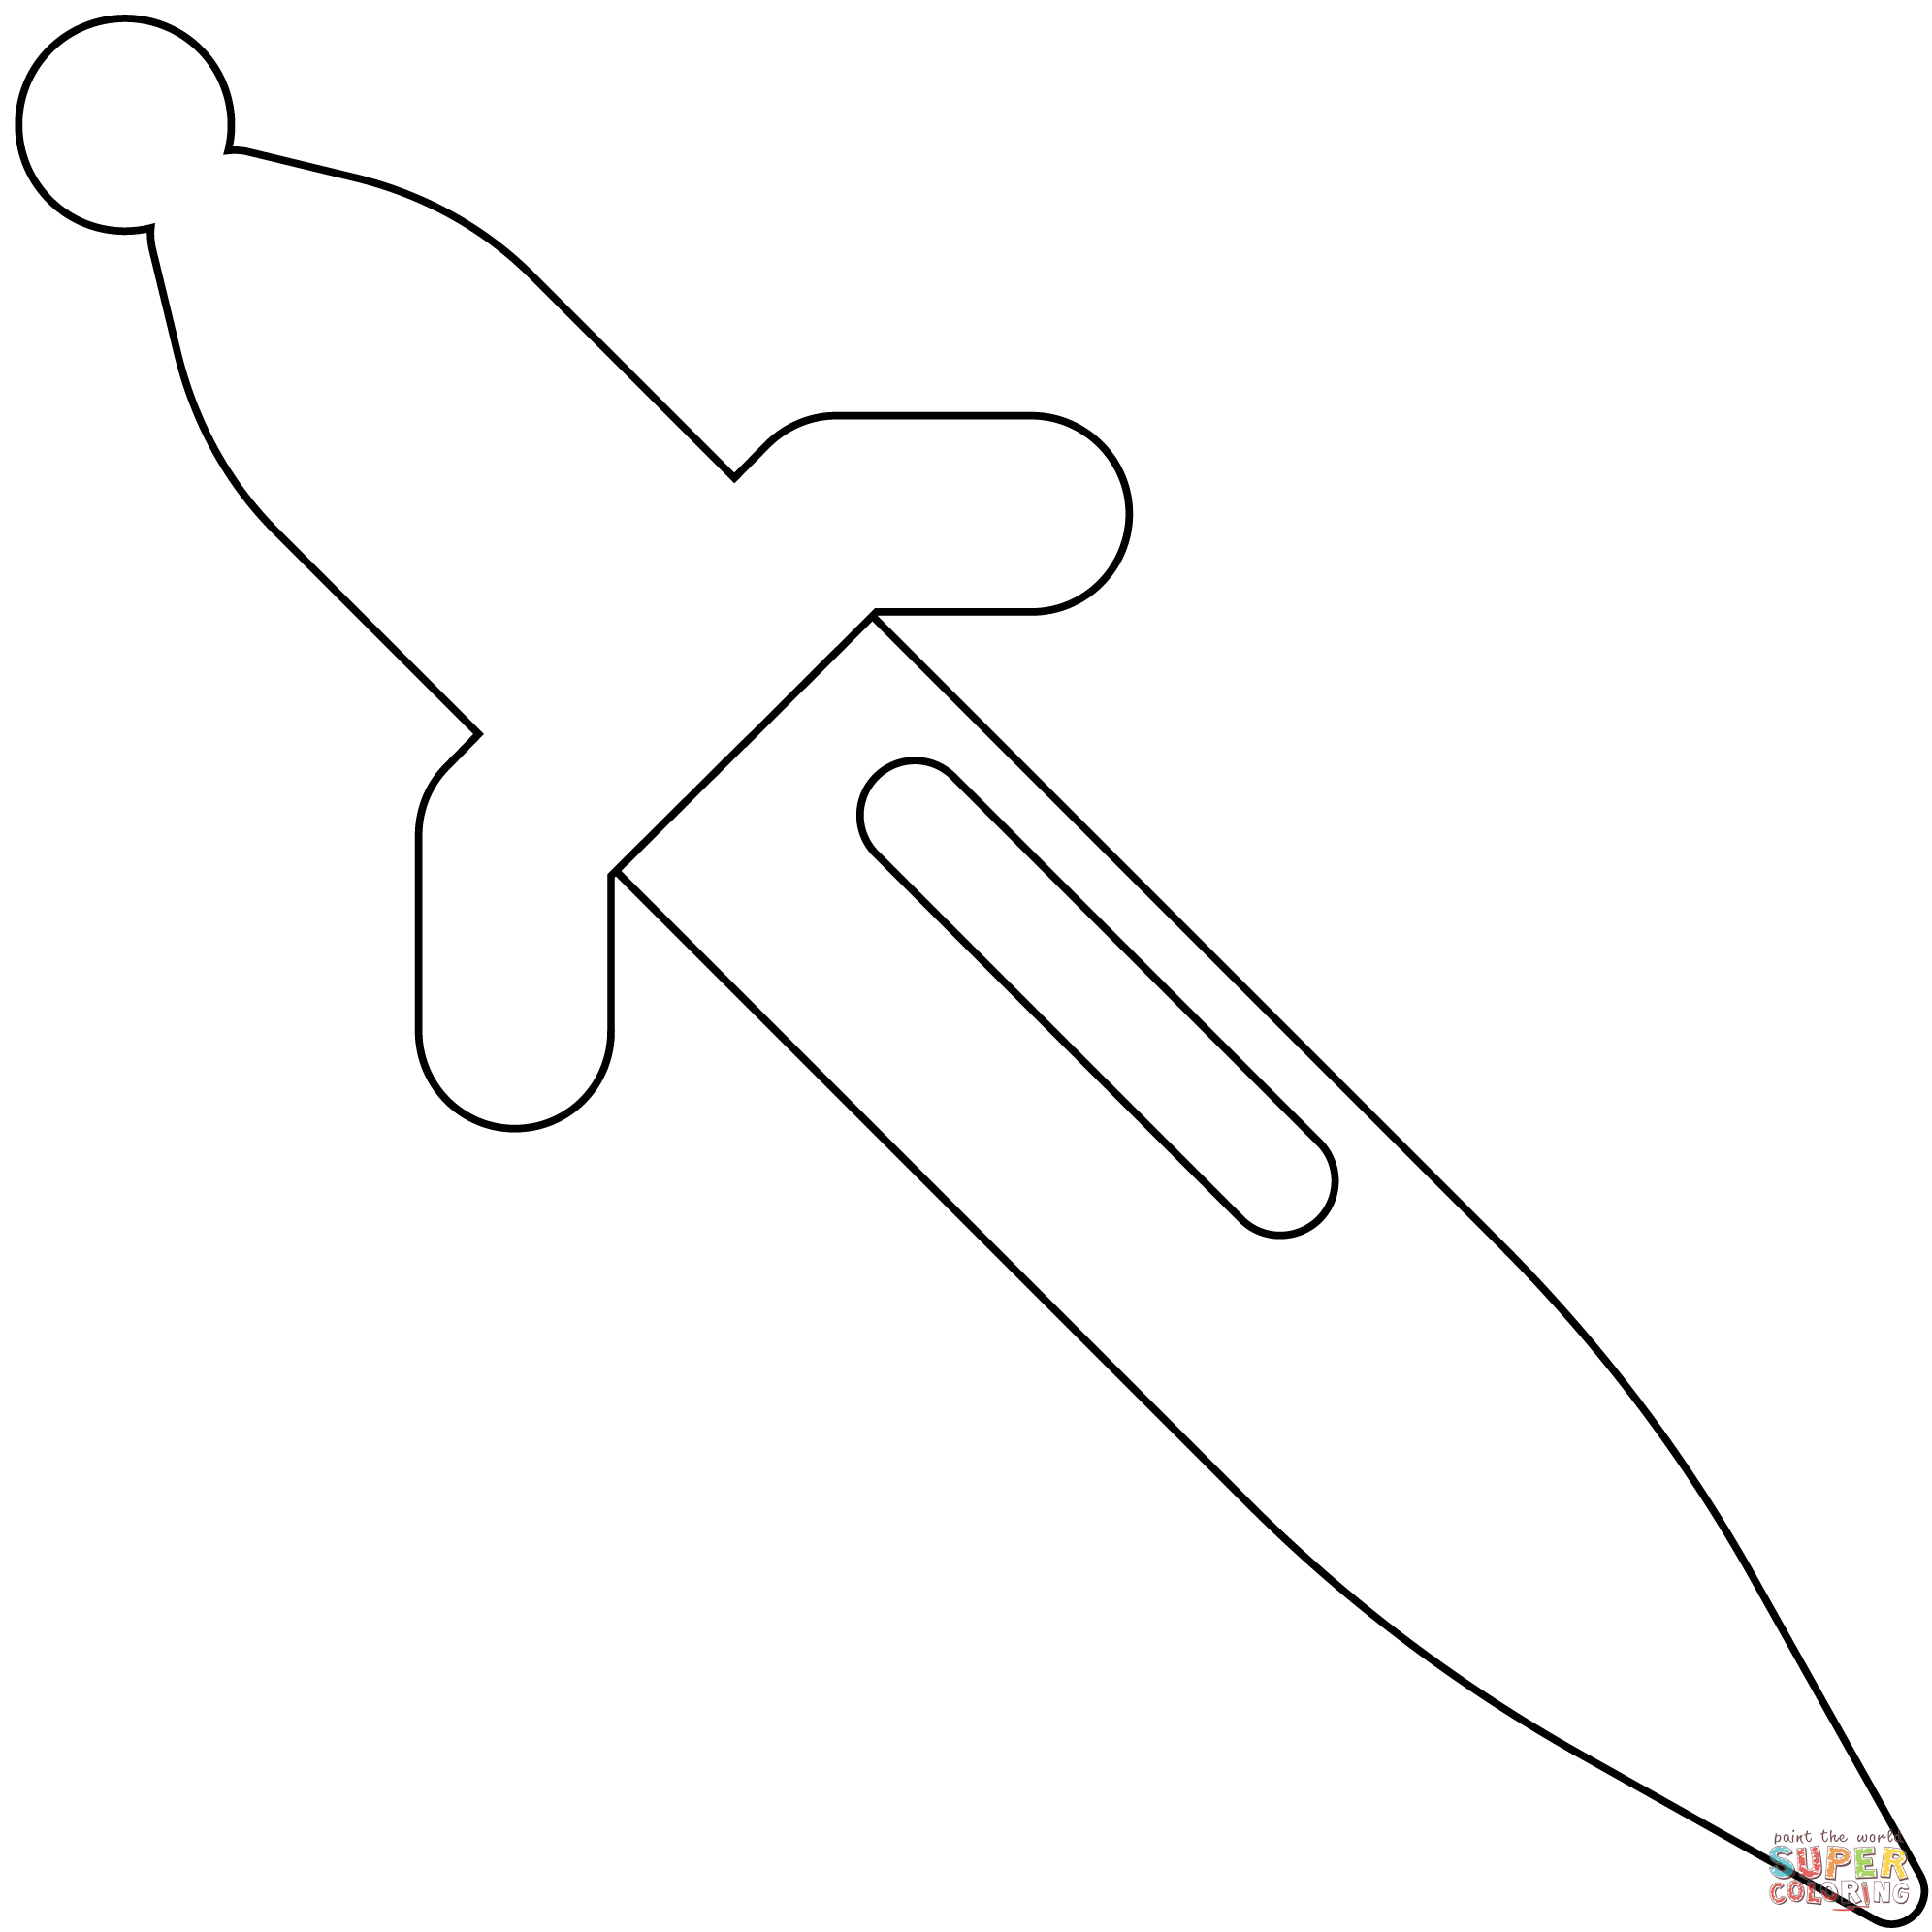 Dagger knife emoji coloring page free printable coloring pages